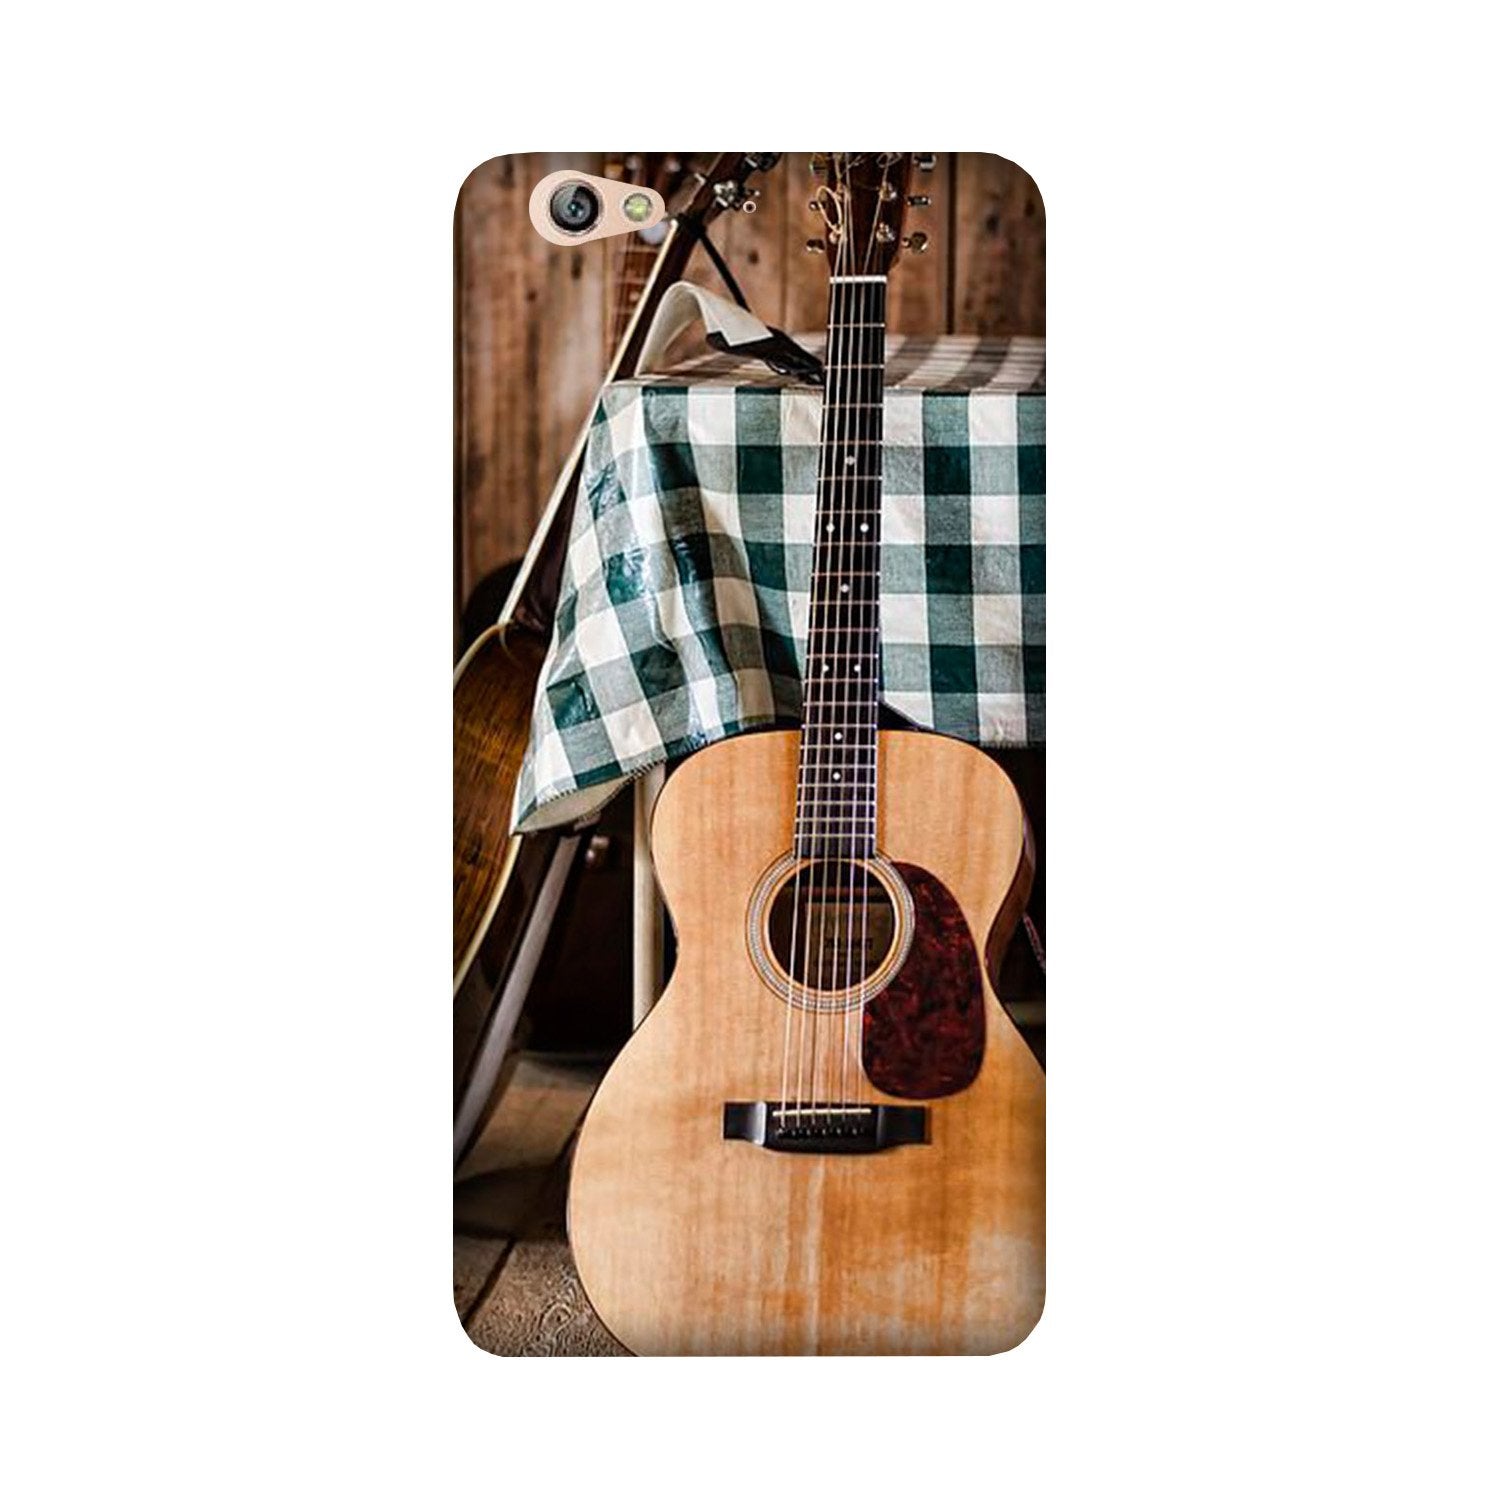 Guitar2 Case for Gionee S6